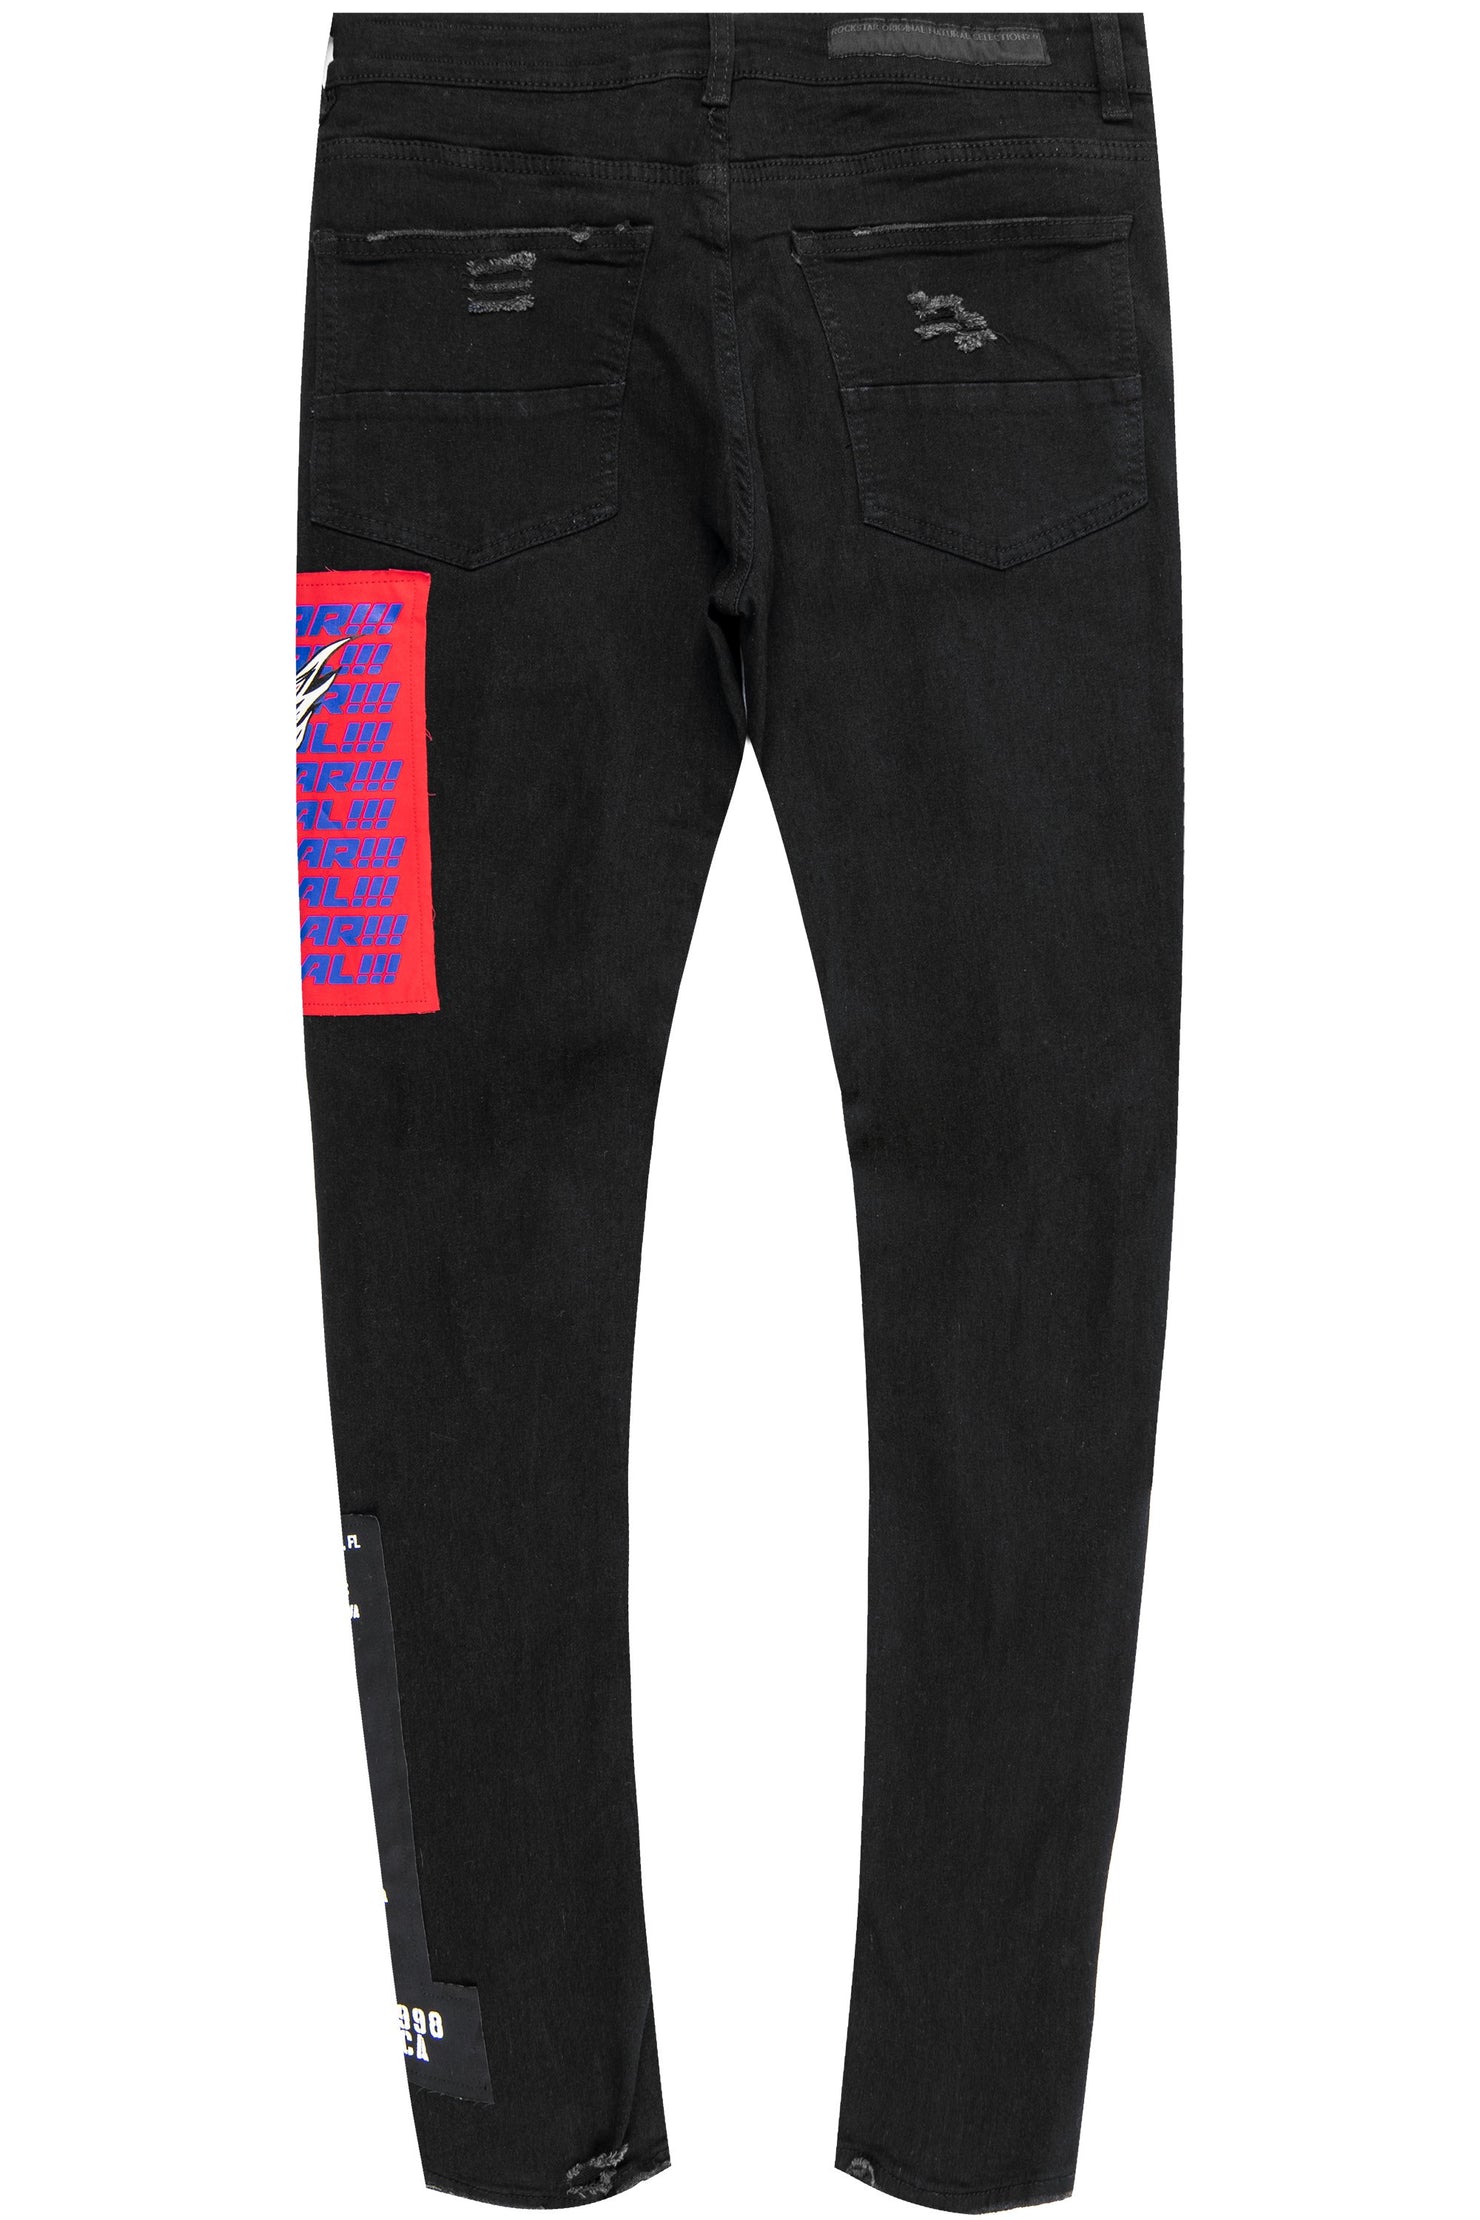 Cannon Patchwork Jean- Black/Red